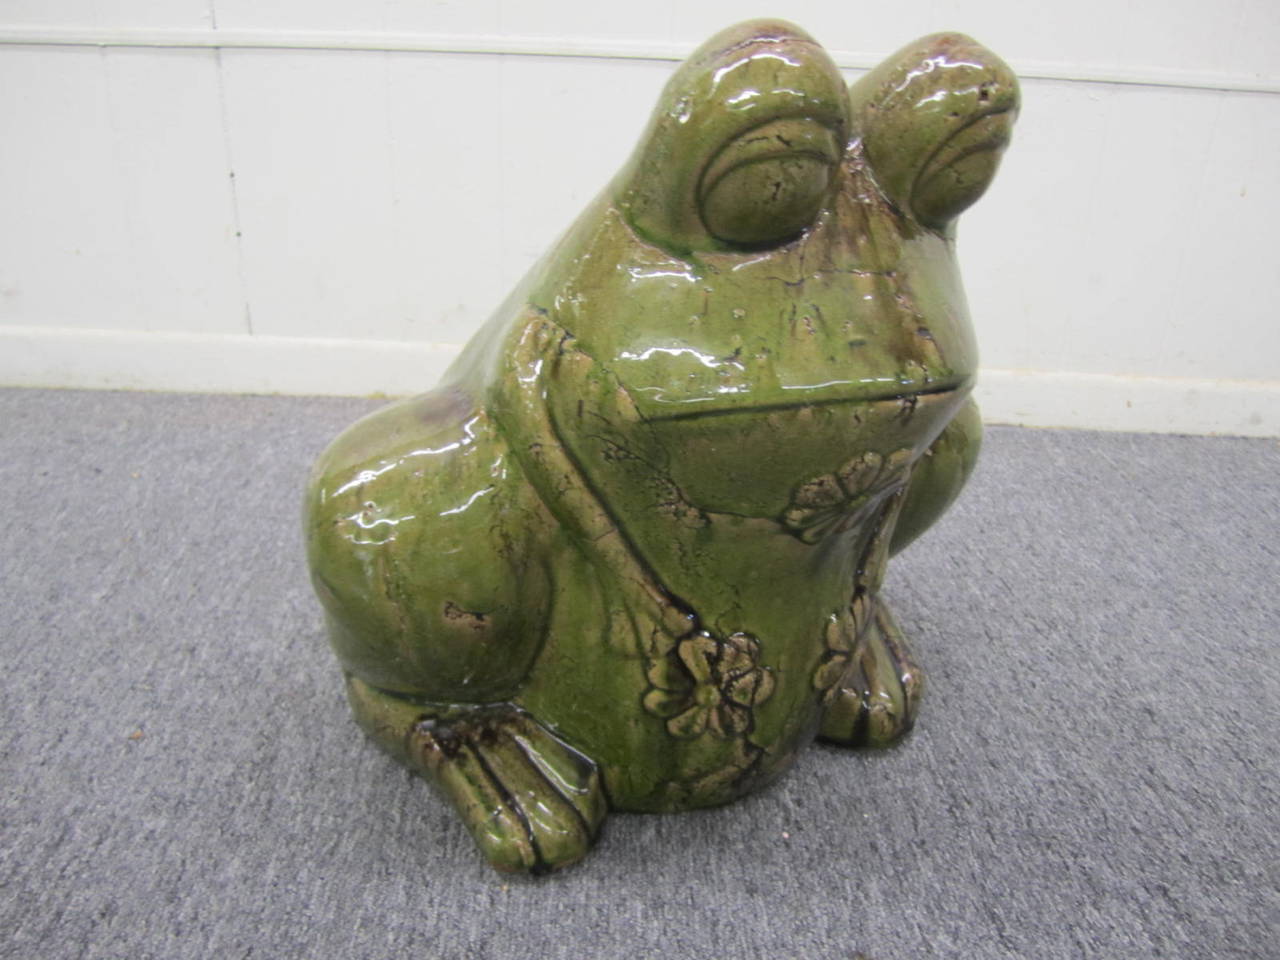 Absolutely charming large green glazed frog planter from the Mid-Century. Its takes all of my will power not to take this piece home to live with me but hubby says no more pets! Darn!